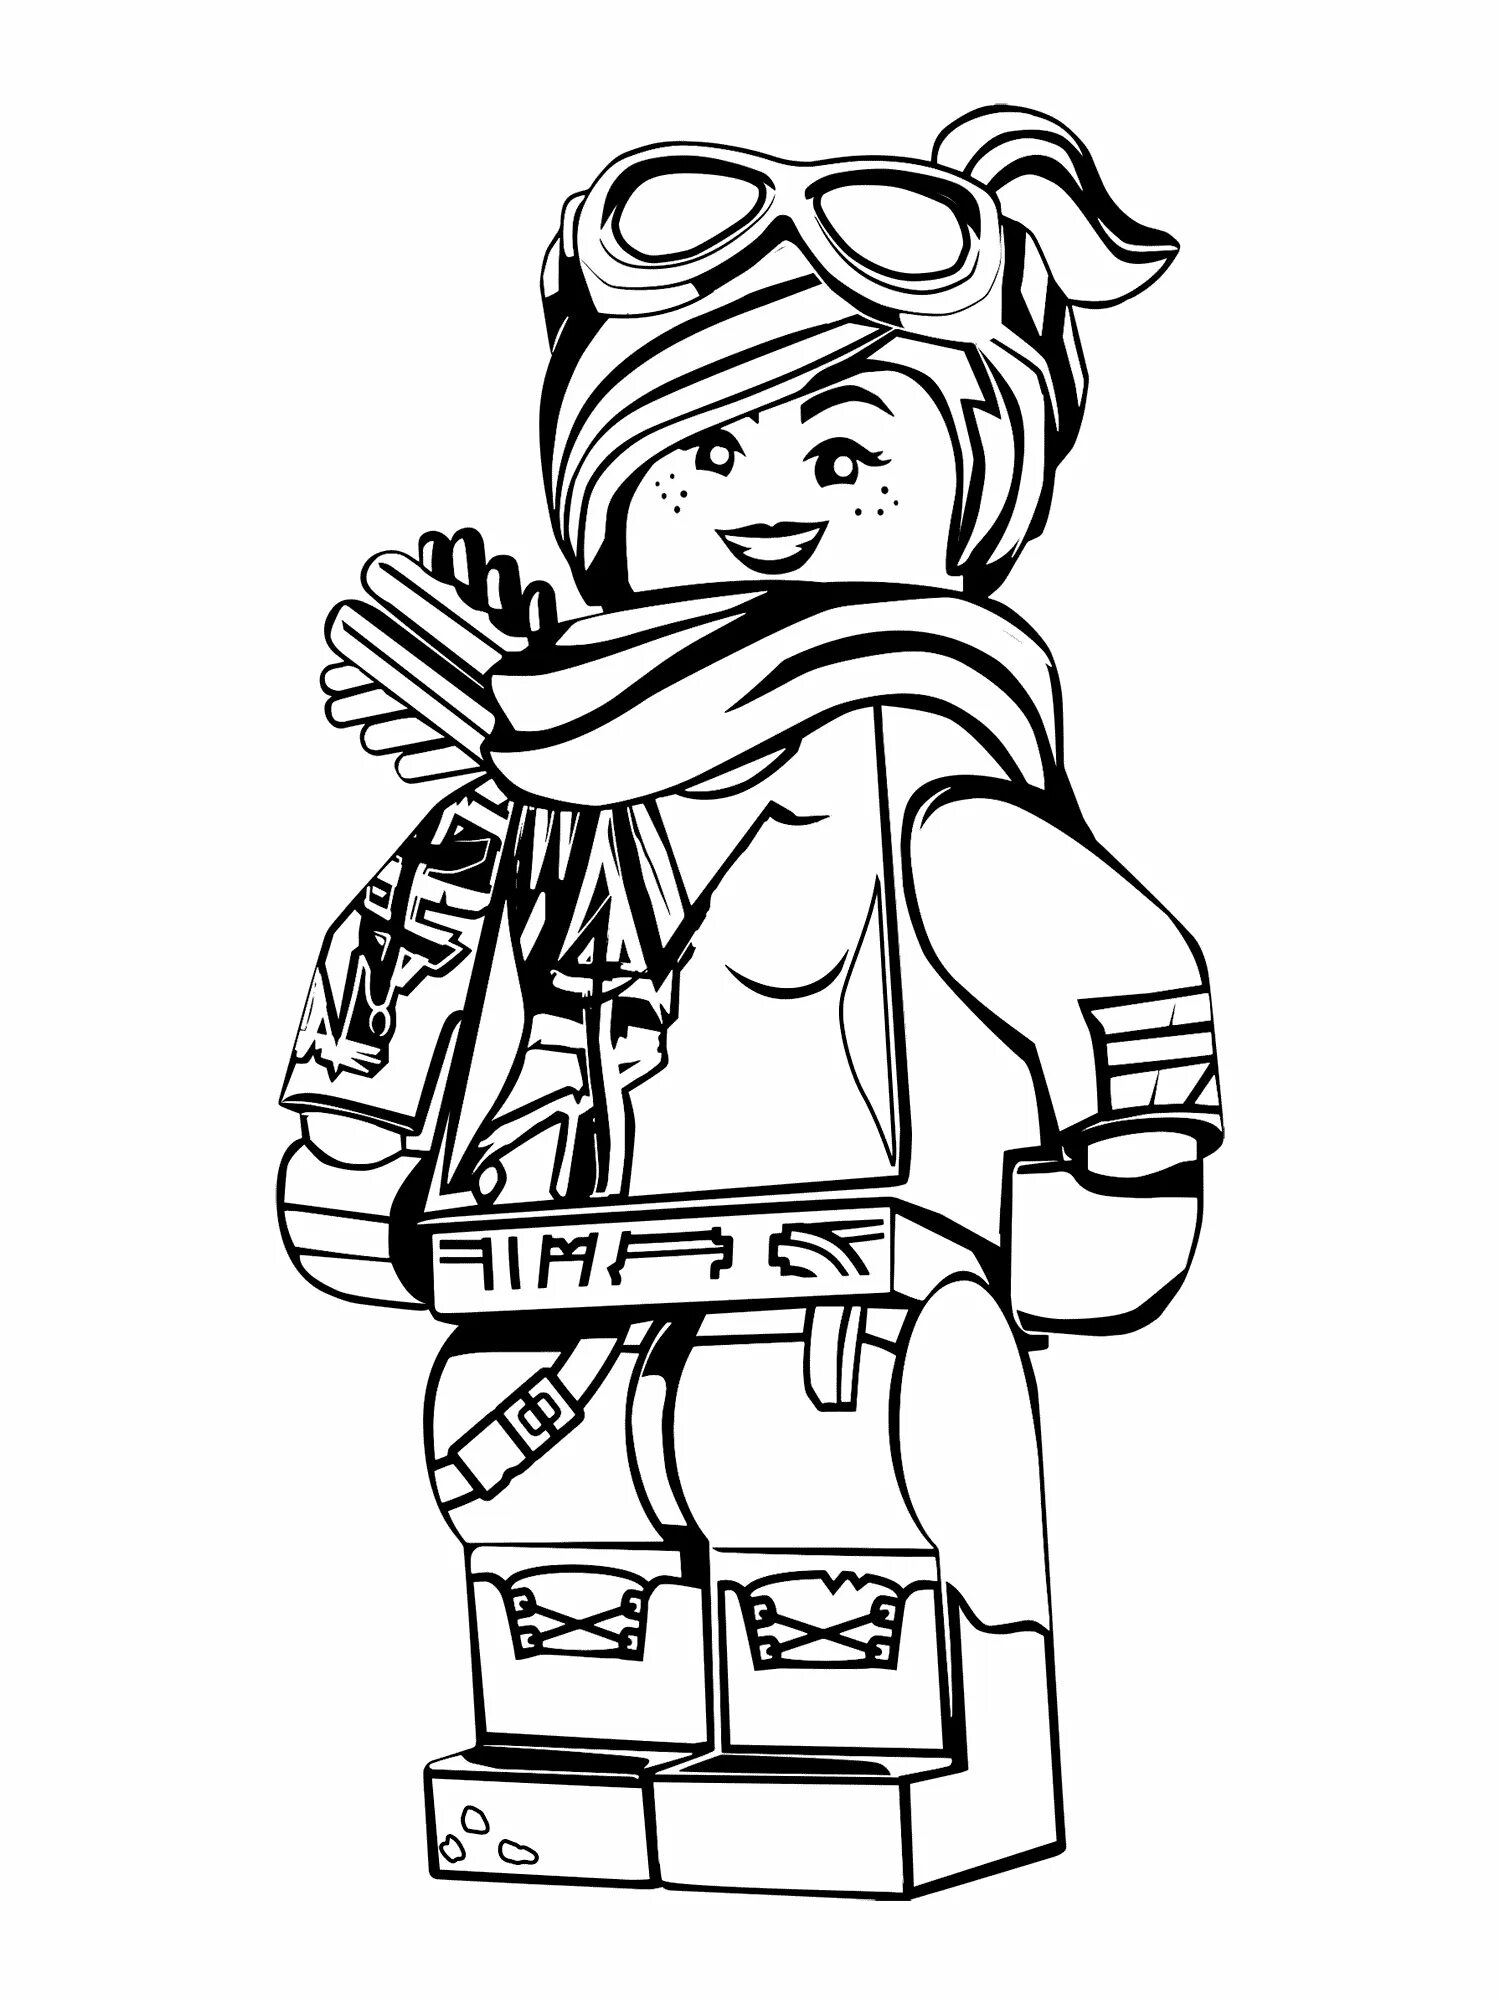 Witty lego movie 2 coloring book